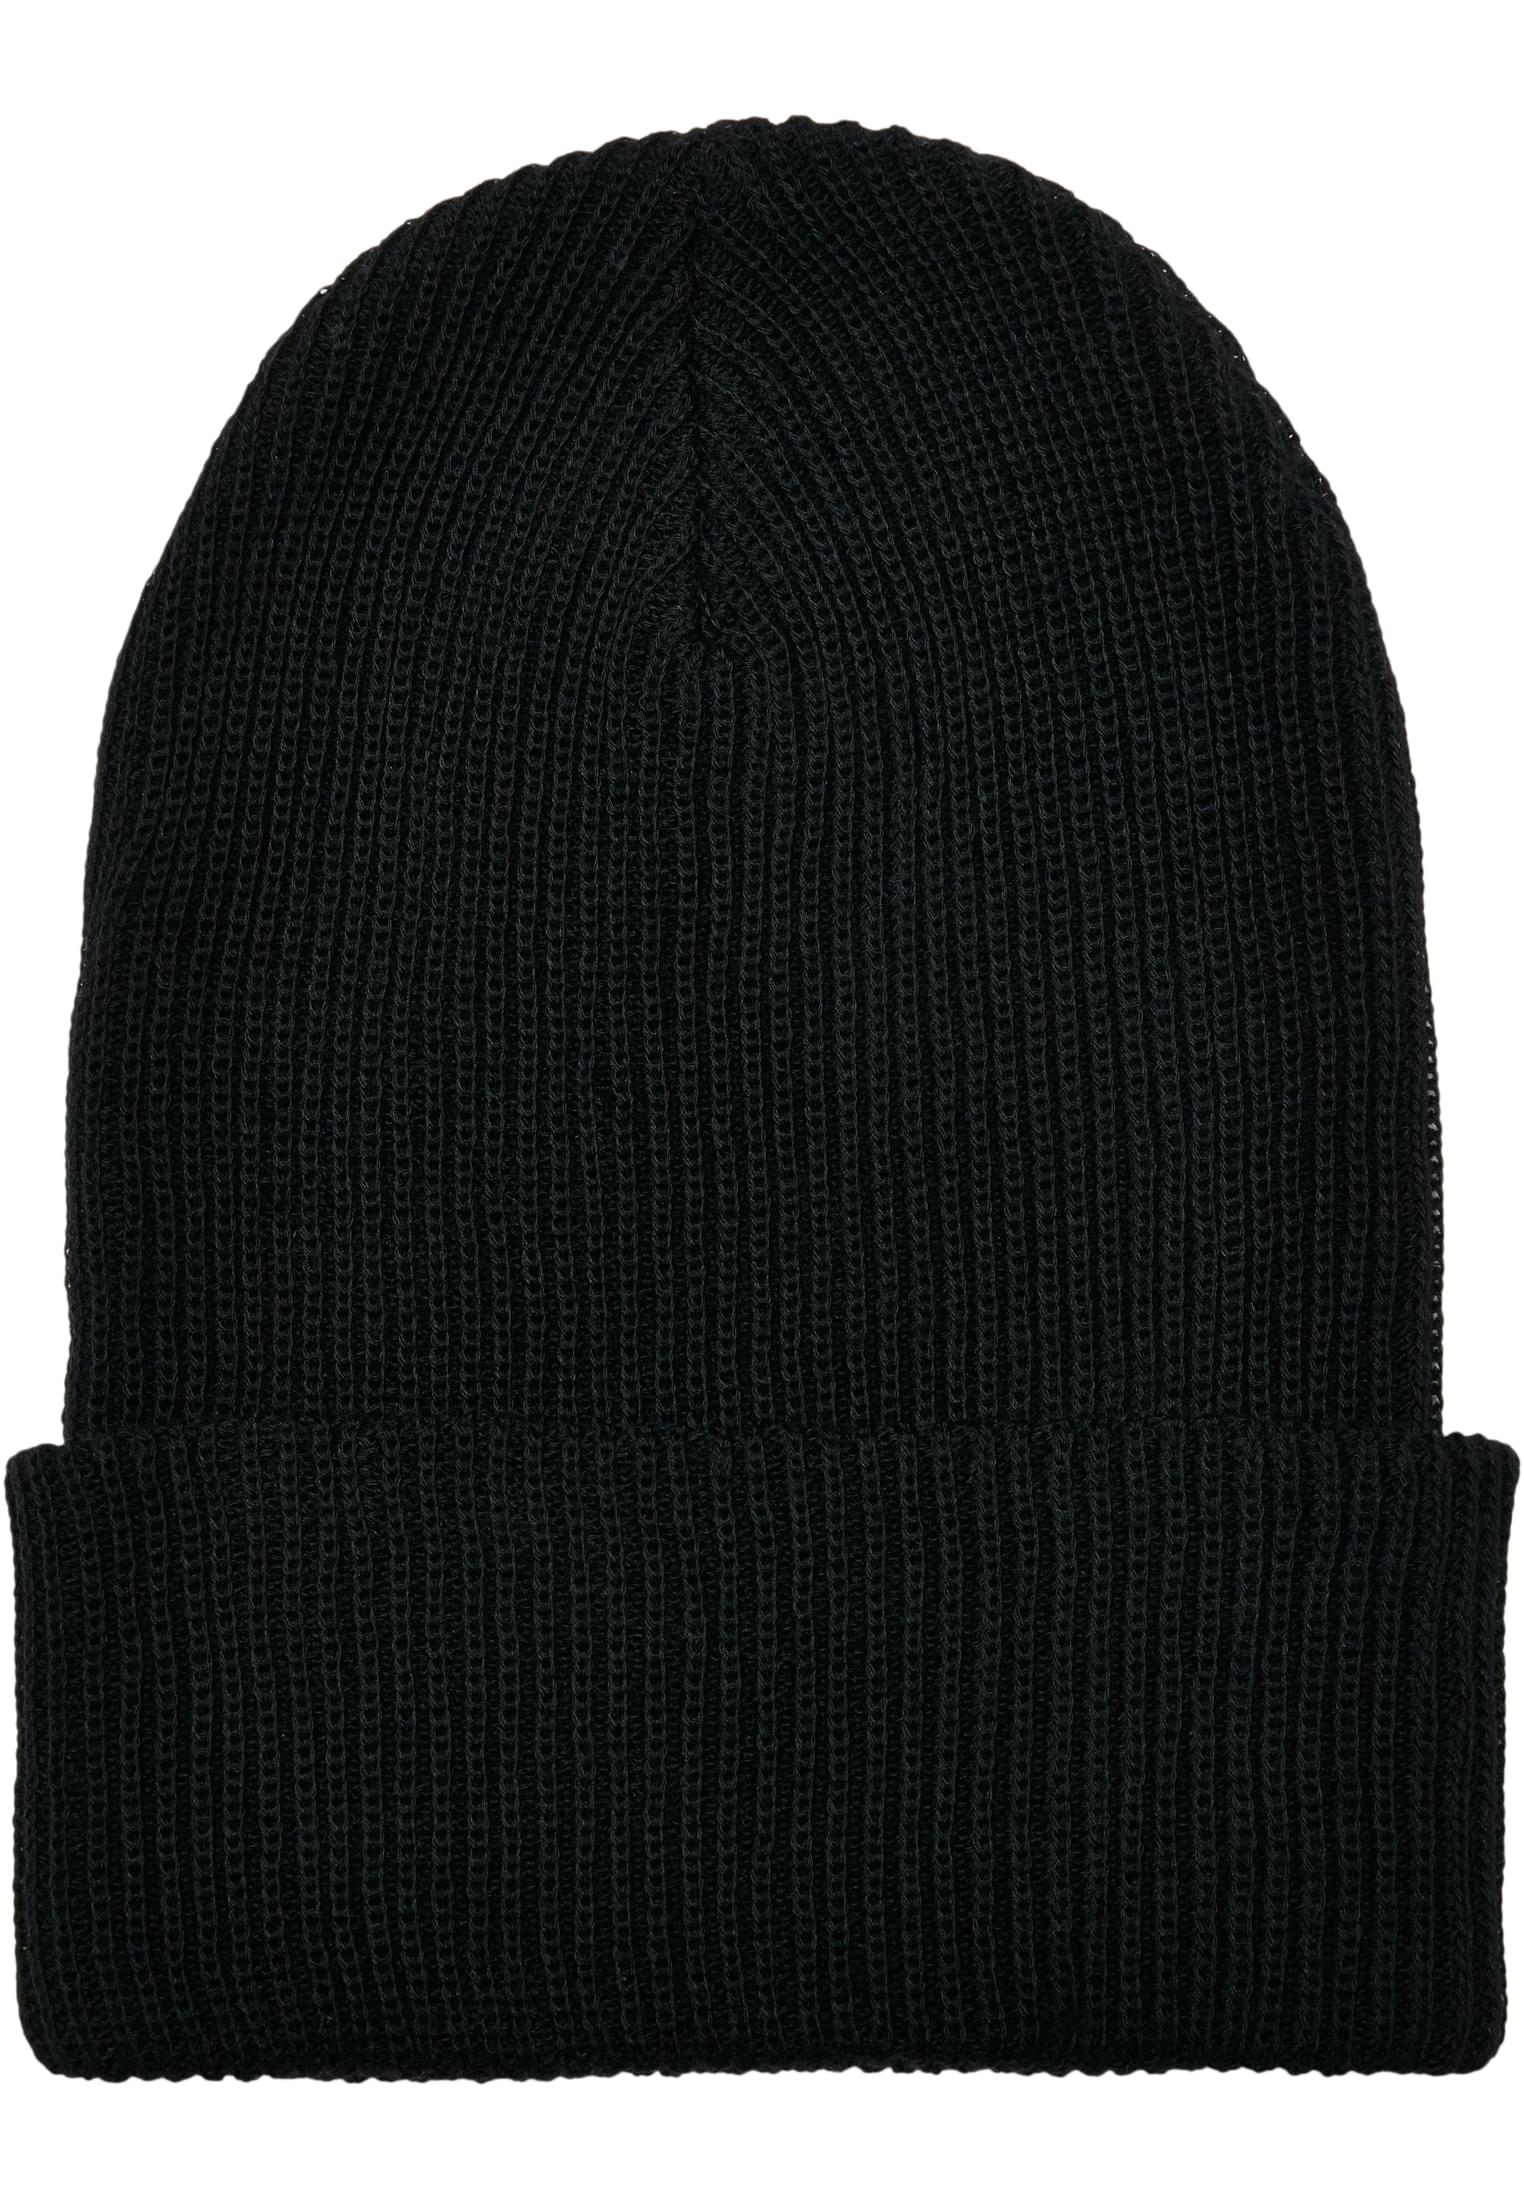 Ribbed knit cap made of recycled yarn black